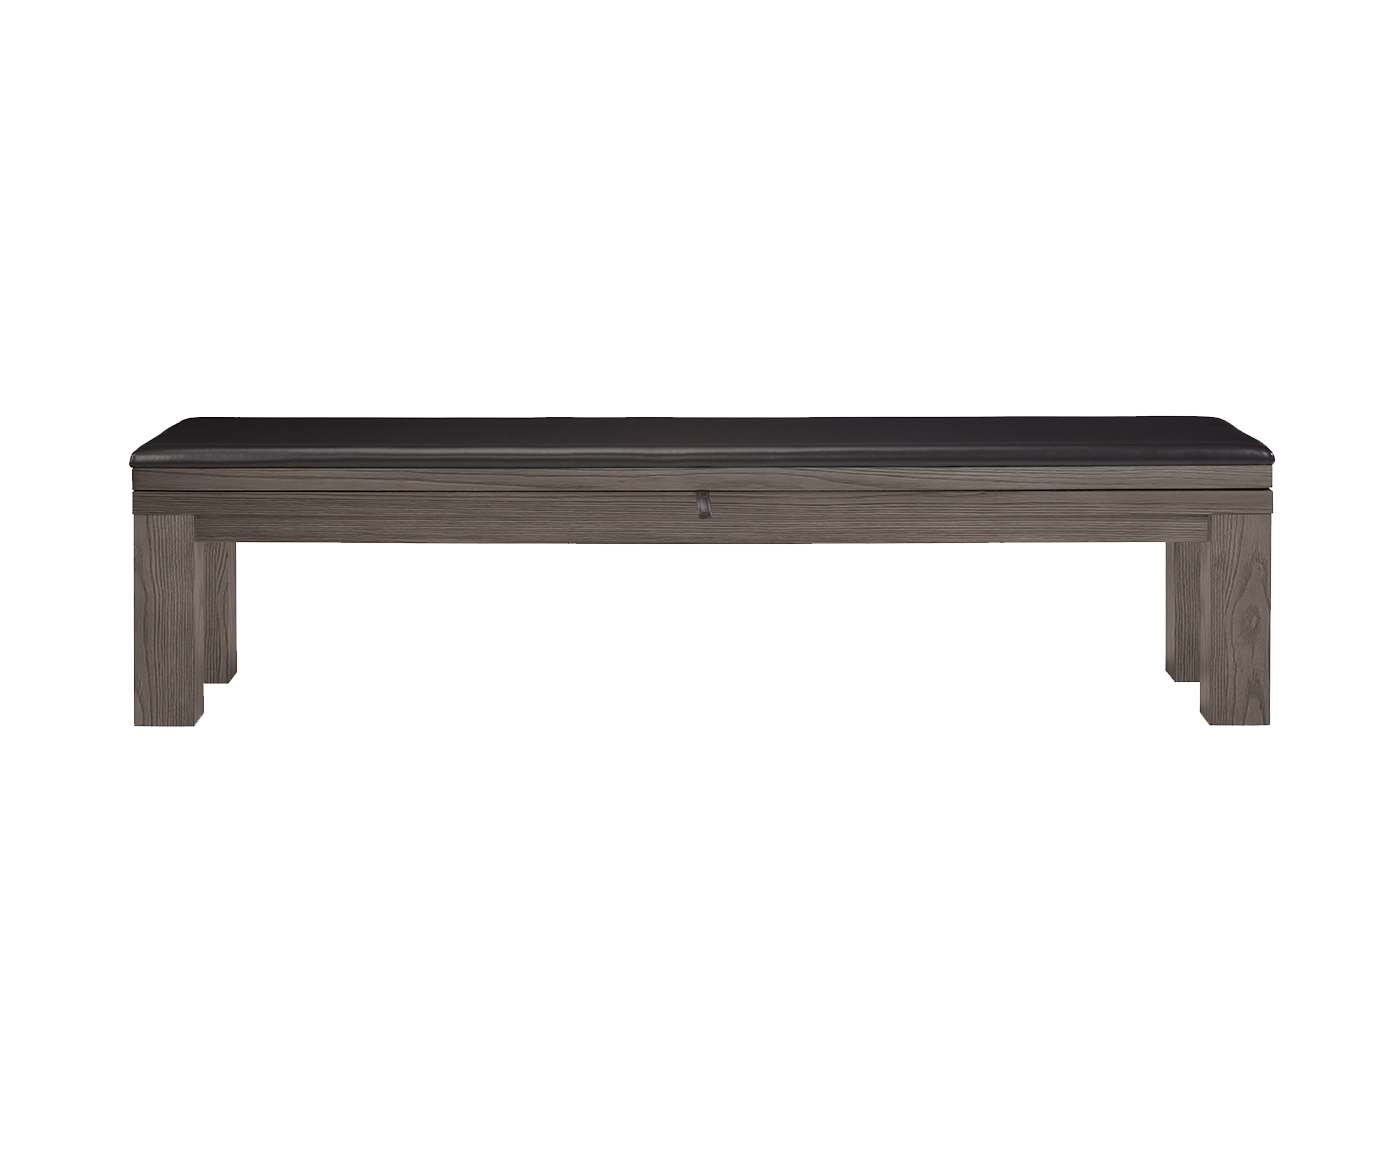 American Heritage Alta Multi-functional Storage Bench  (Charcoal)